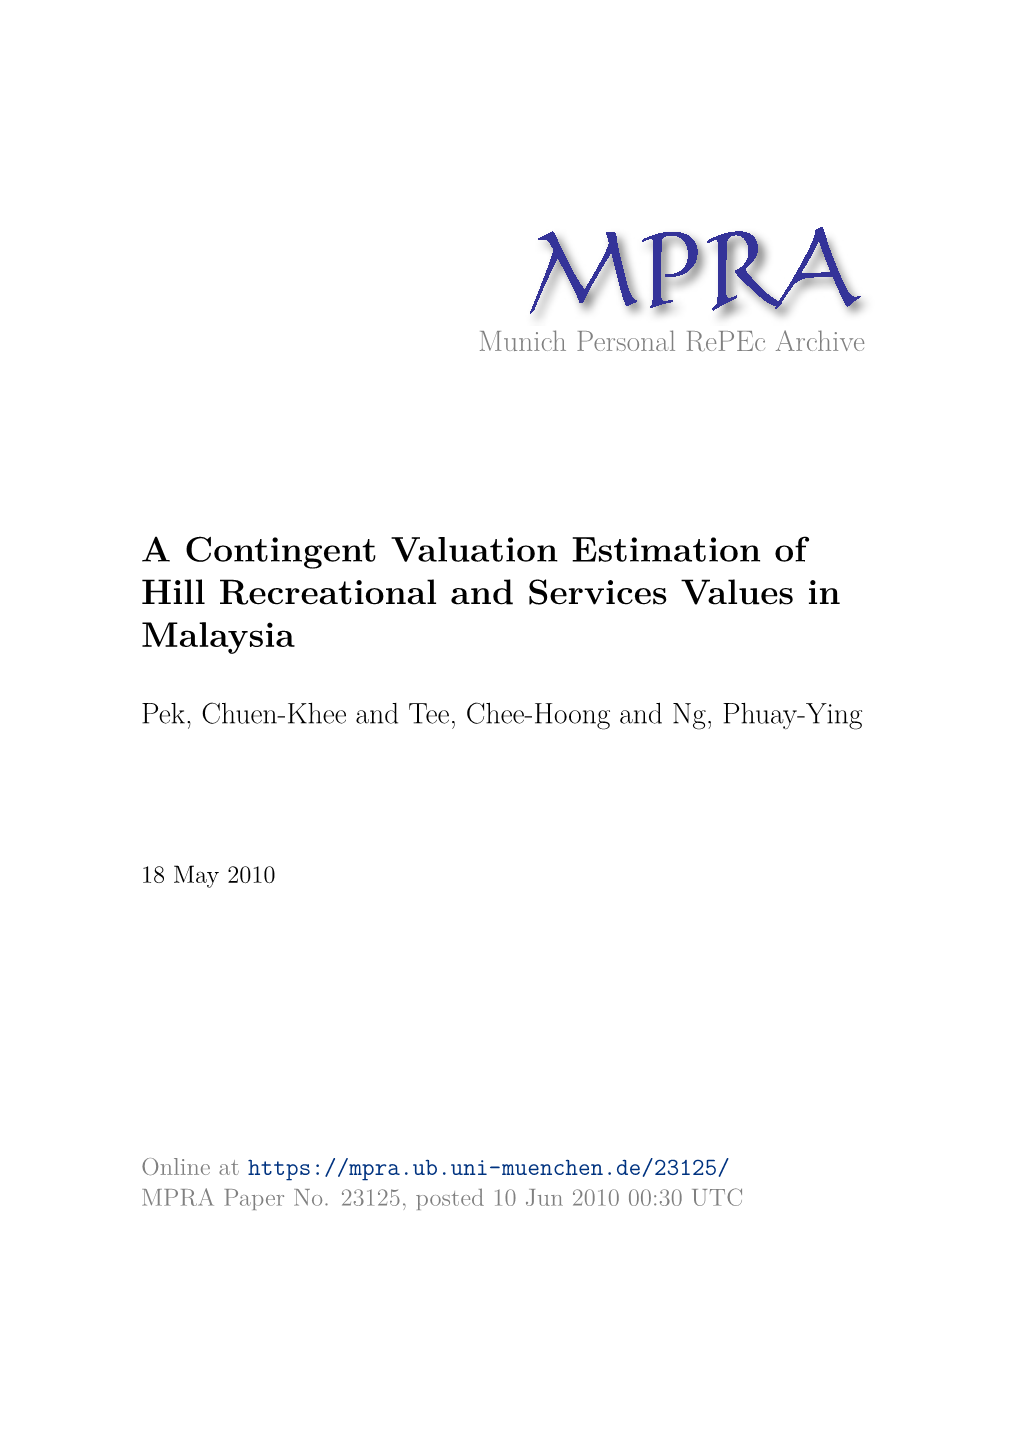 A Contingent Valuation Estimation of Hill Recreational and Services Values in Malaysia